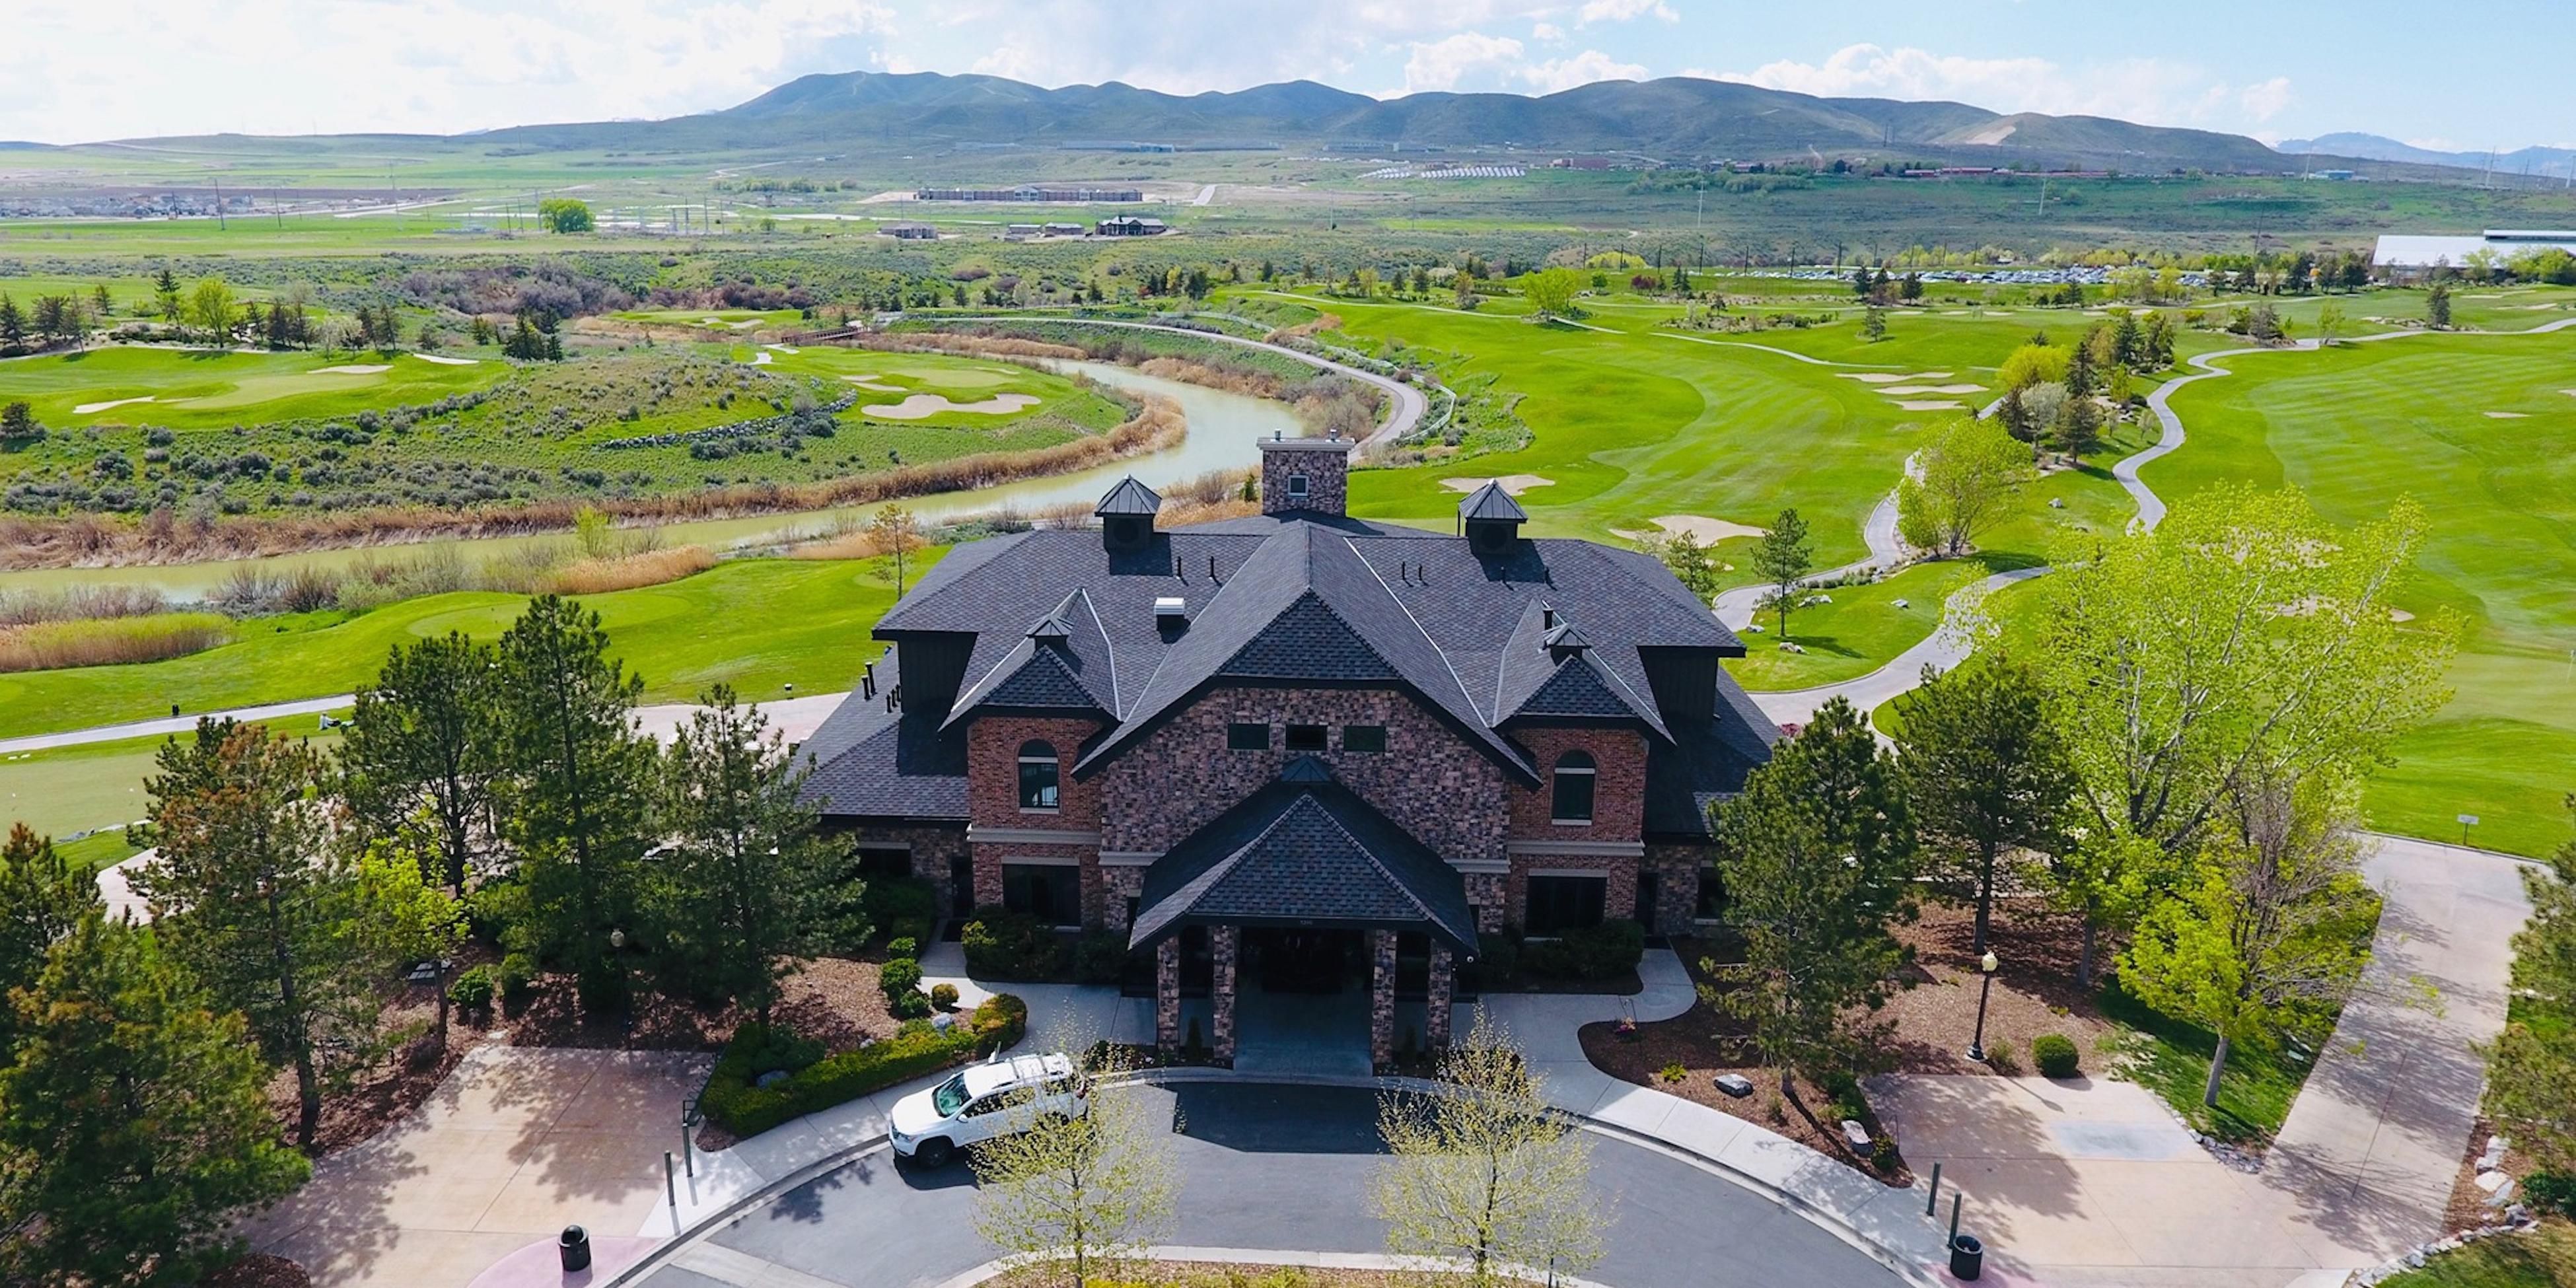 The Wow factor you're looking for in golf, dinning, and events! A championship caliber course, Thanksgiving Point Golf Club is 7,714 yards long and covers more than 200 acres, making it the largest golf club in Utah.